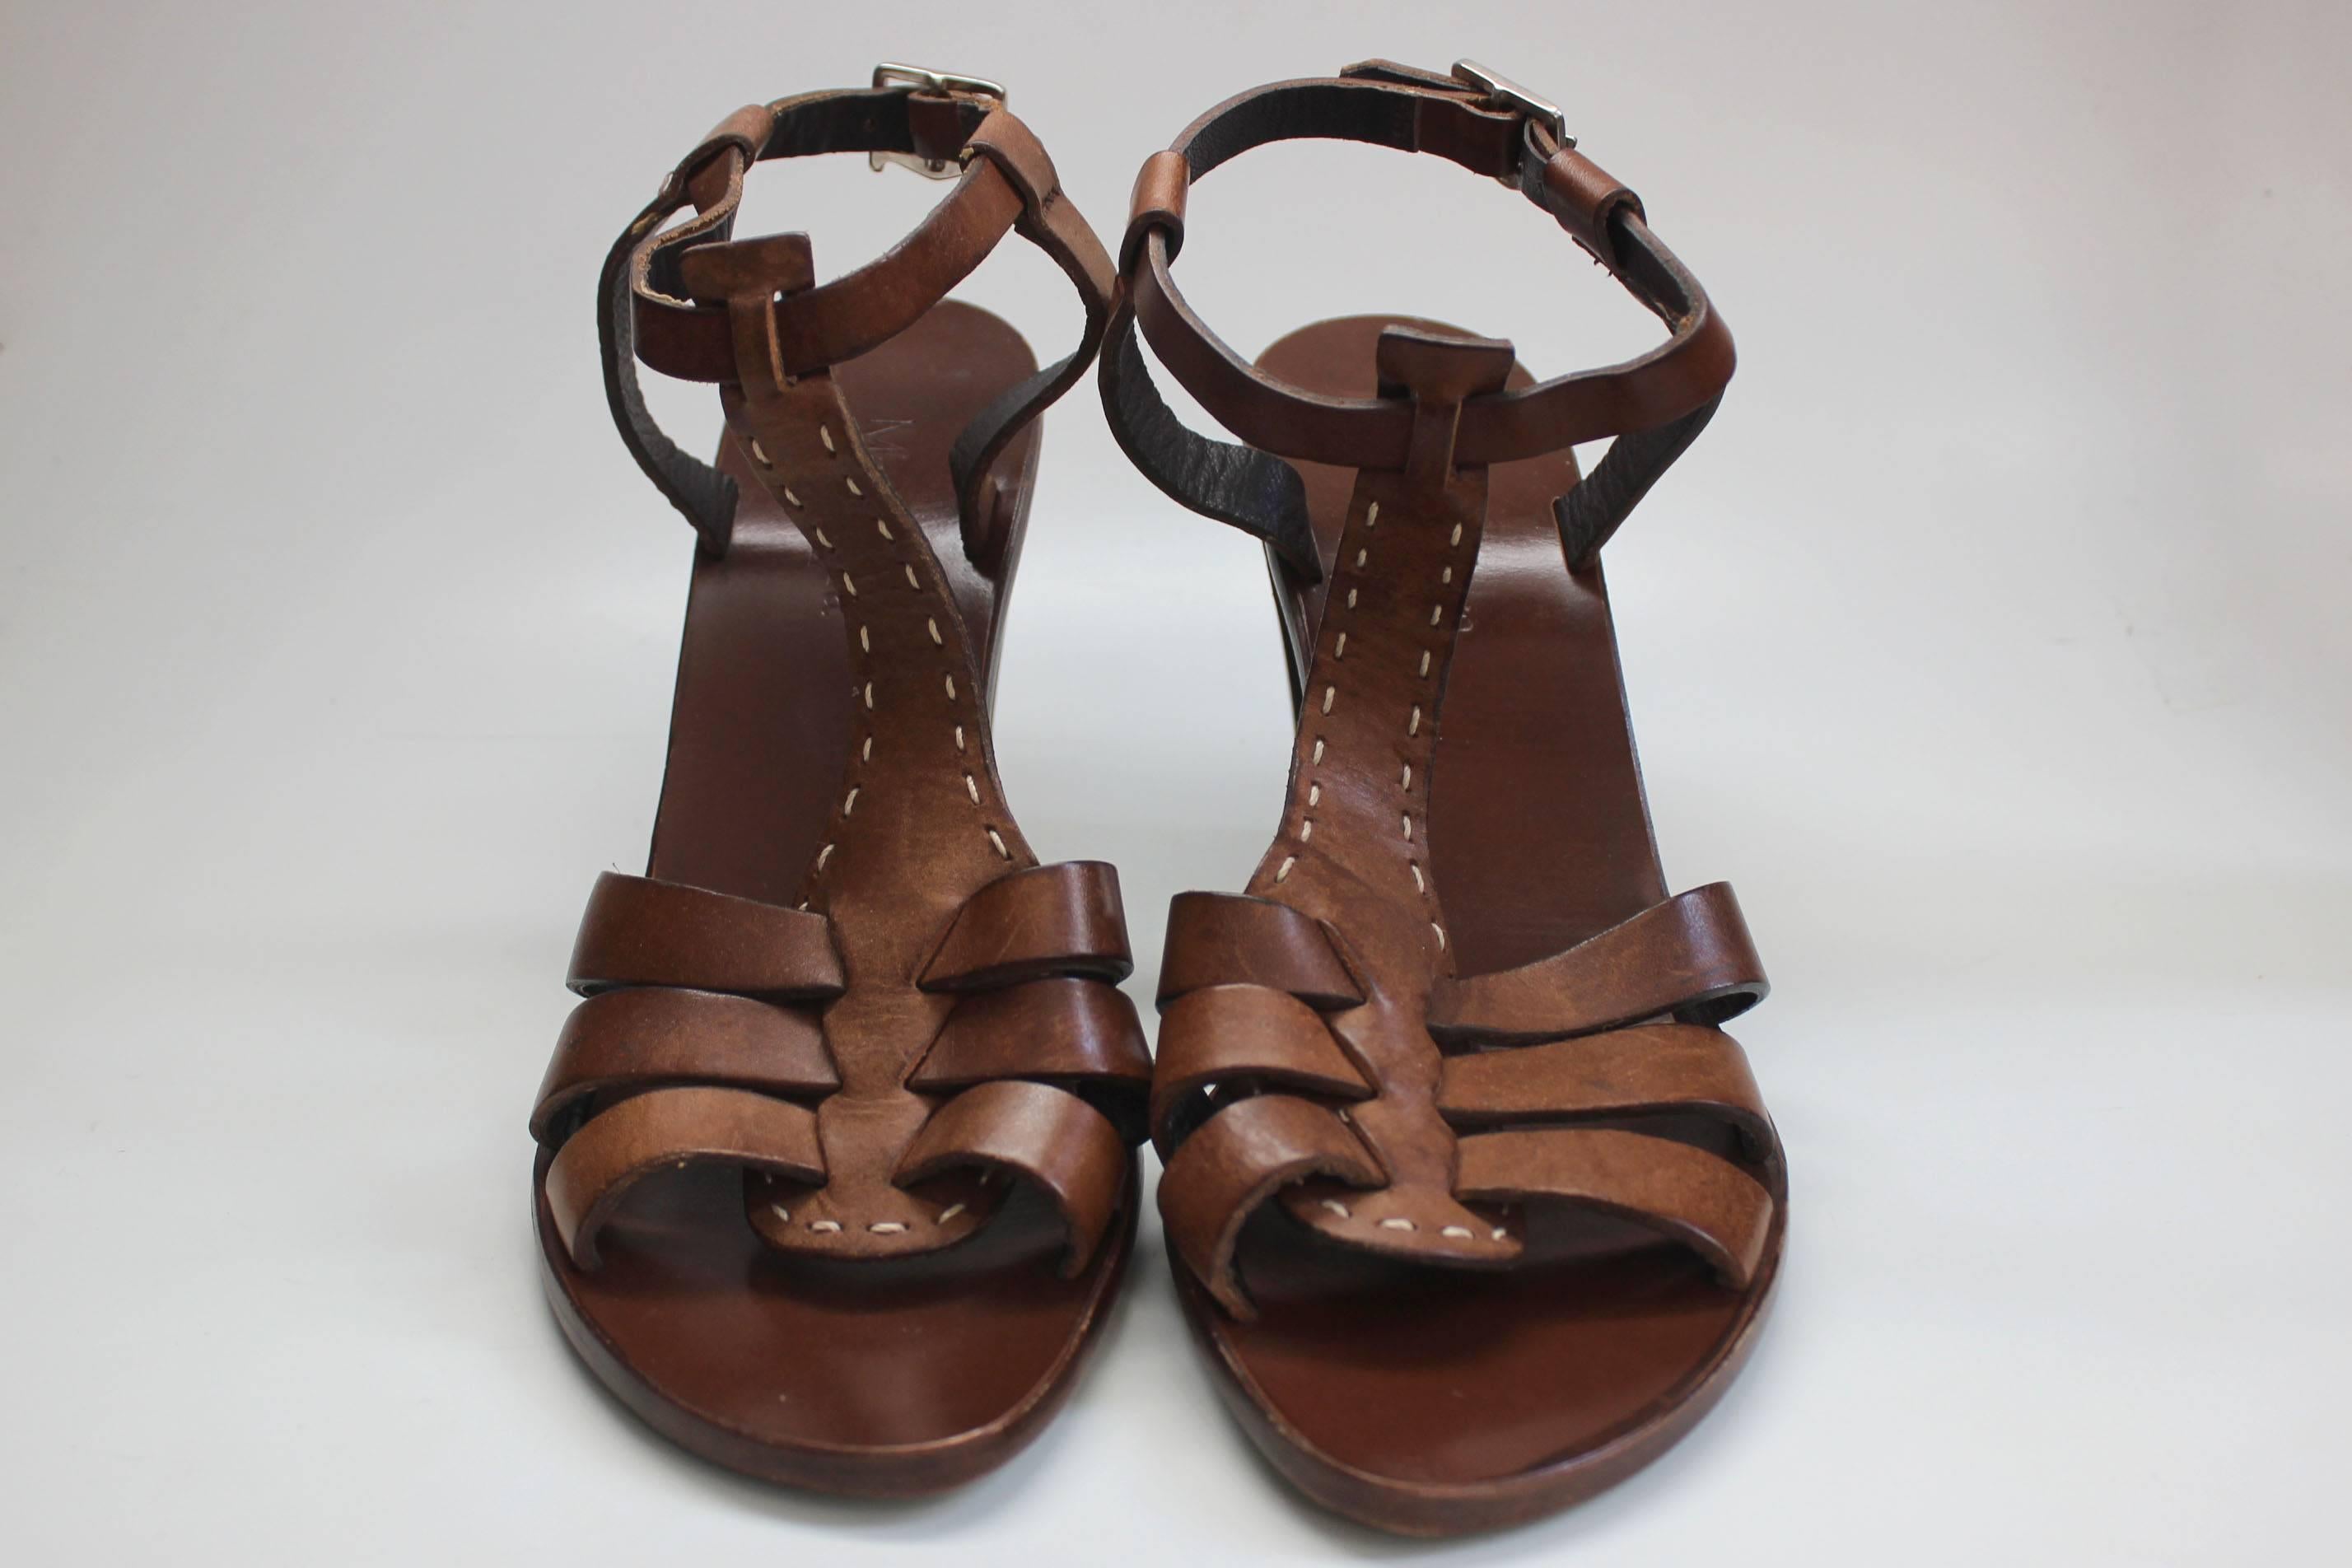 These leather sandals by Max Mara have three straps of brown saddle leather across the toes. The tee strap is stitched with a creme border, and it has a 4 inch heel.